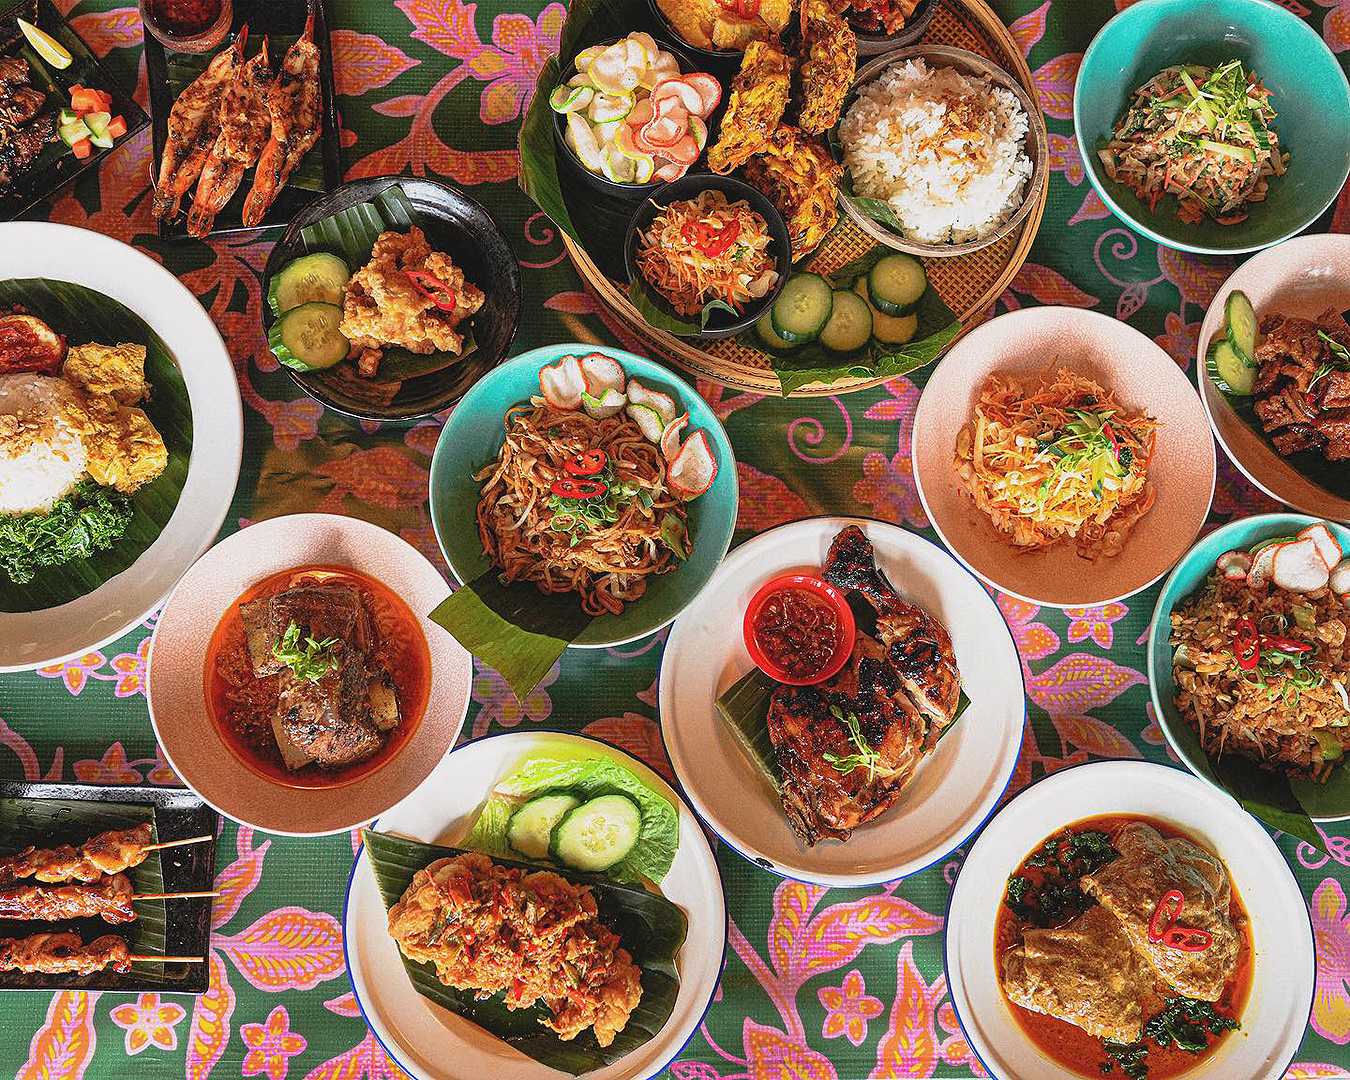 A table bursting with Indonesian goodness at Bali Nights.